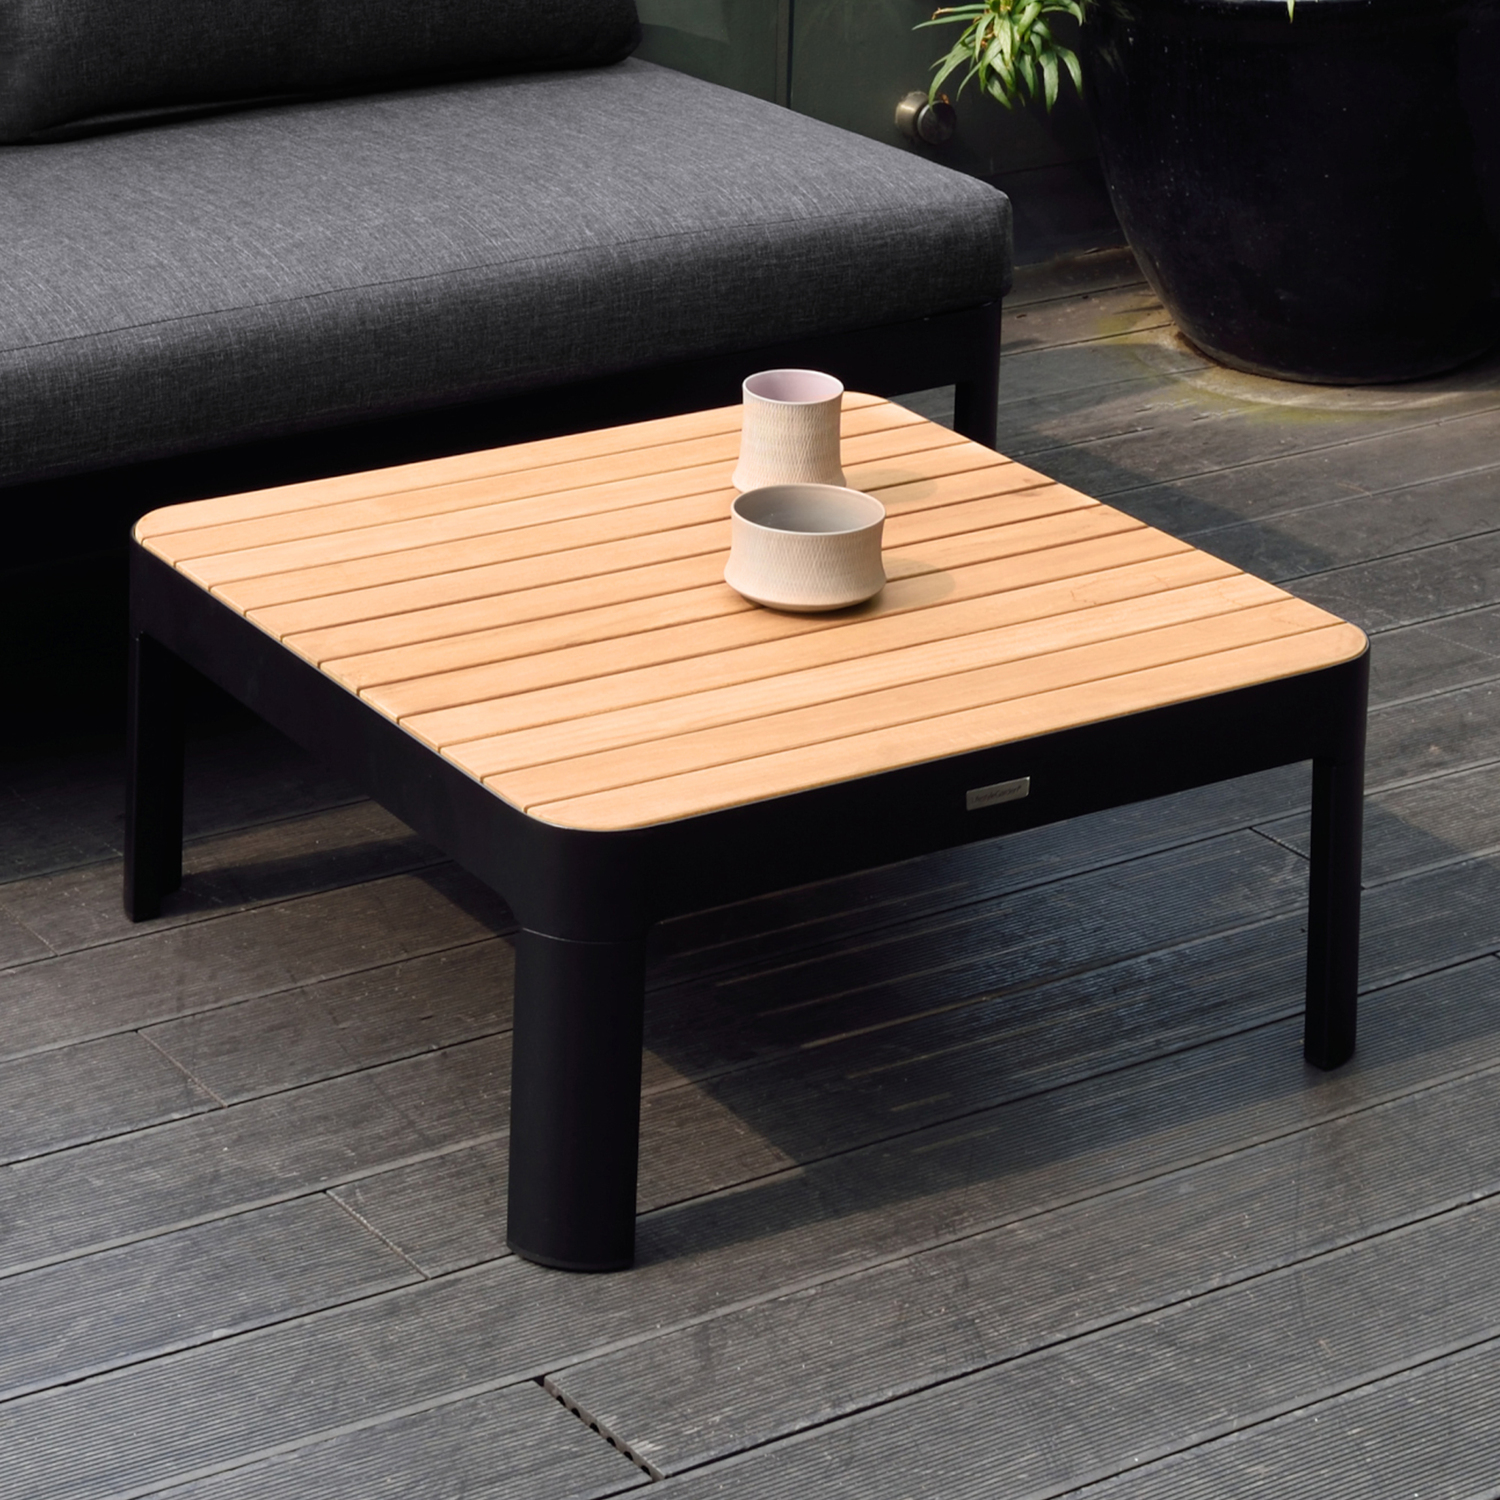 Portals Outdoor Square Coffee Table in Black Finish with Natural Teak Wood Top - image 4 of 6